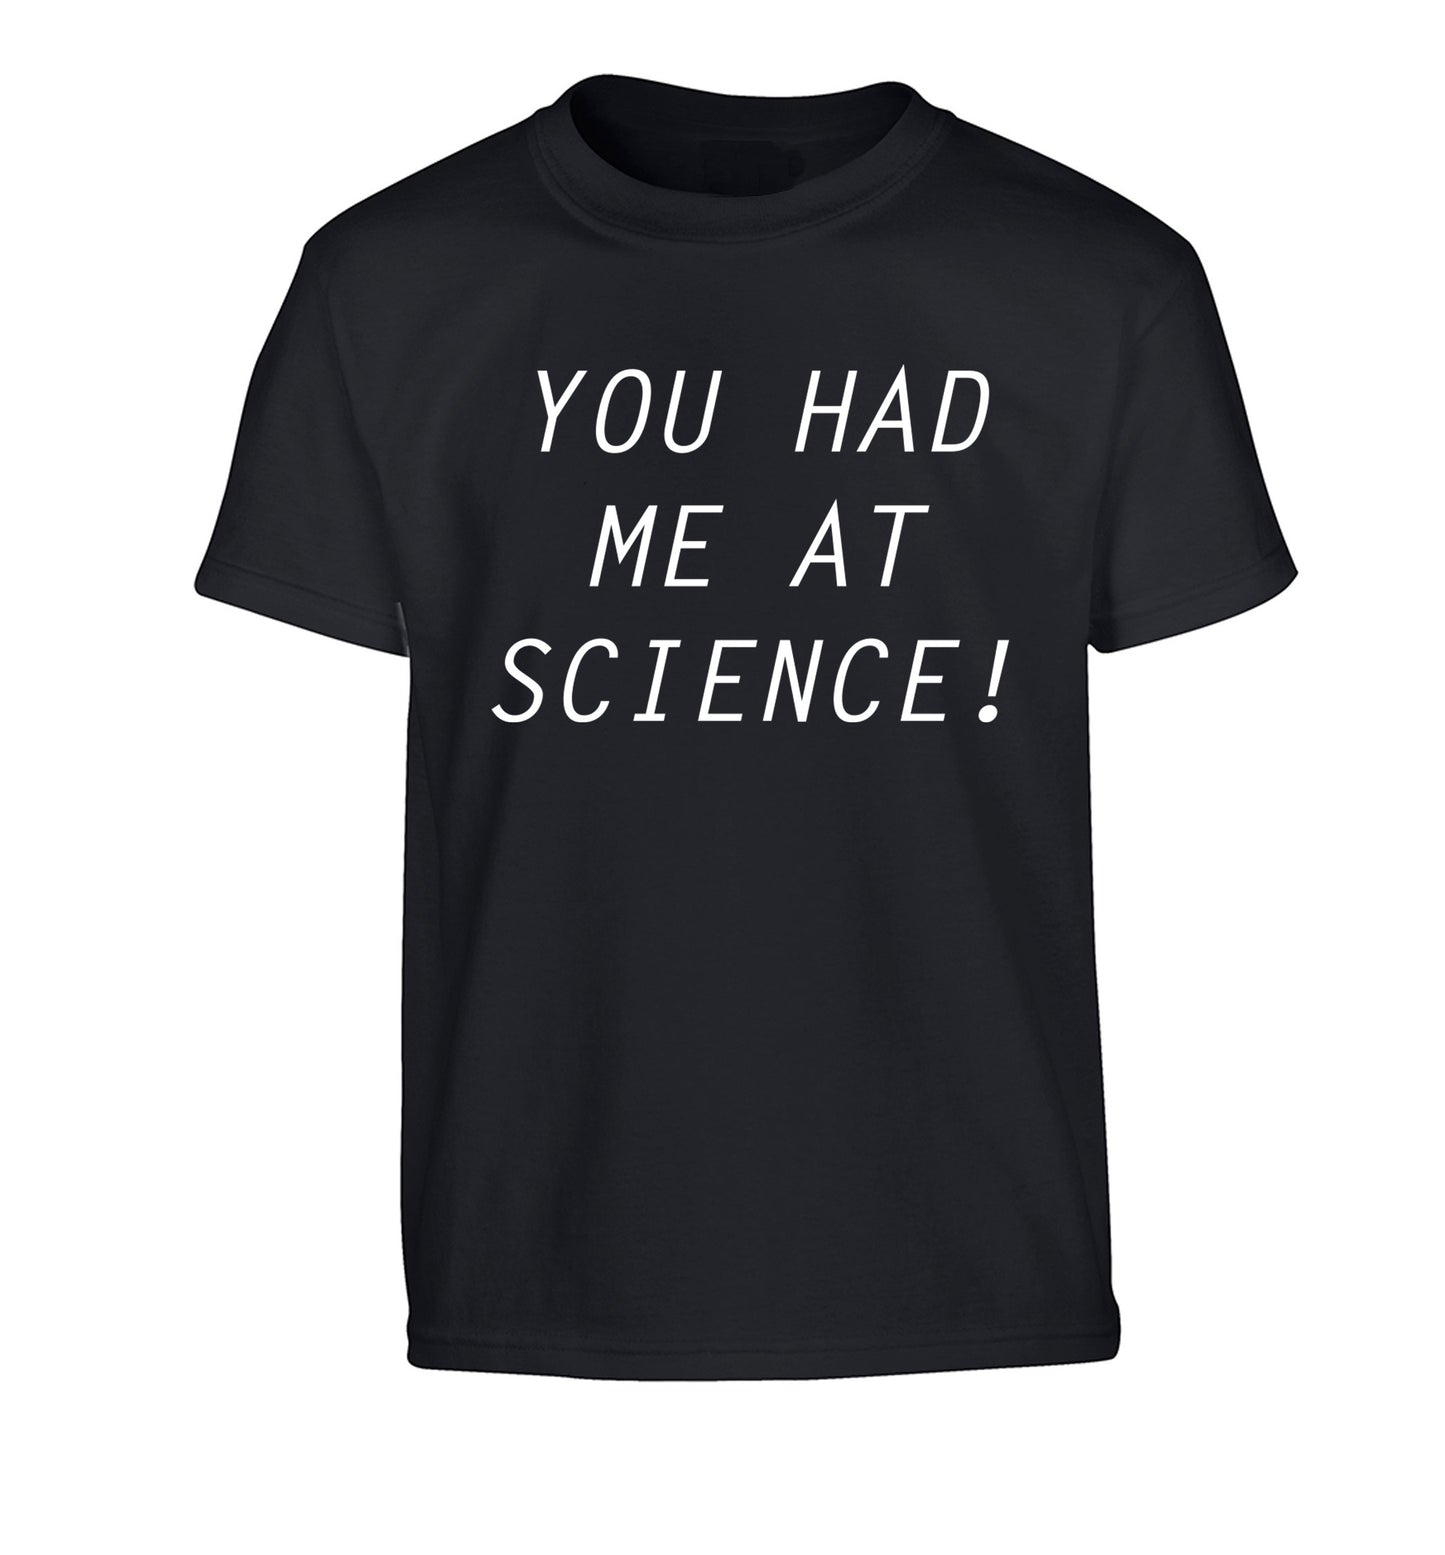 You had me at science Children's black Tshirt 12-14 Years